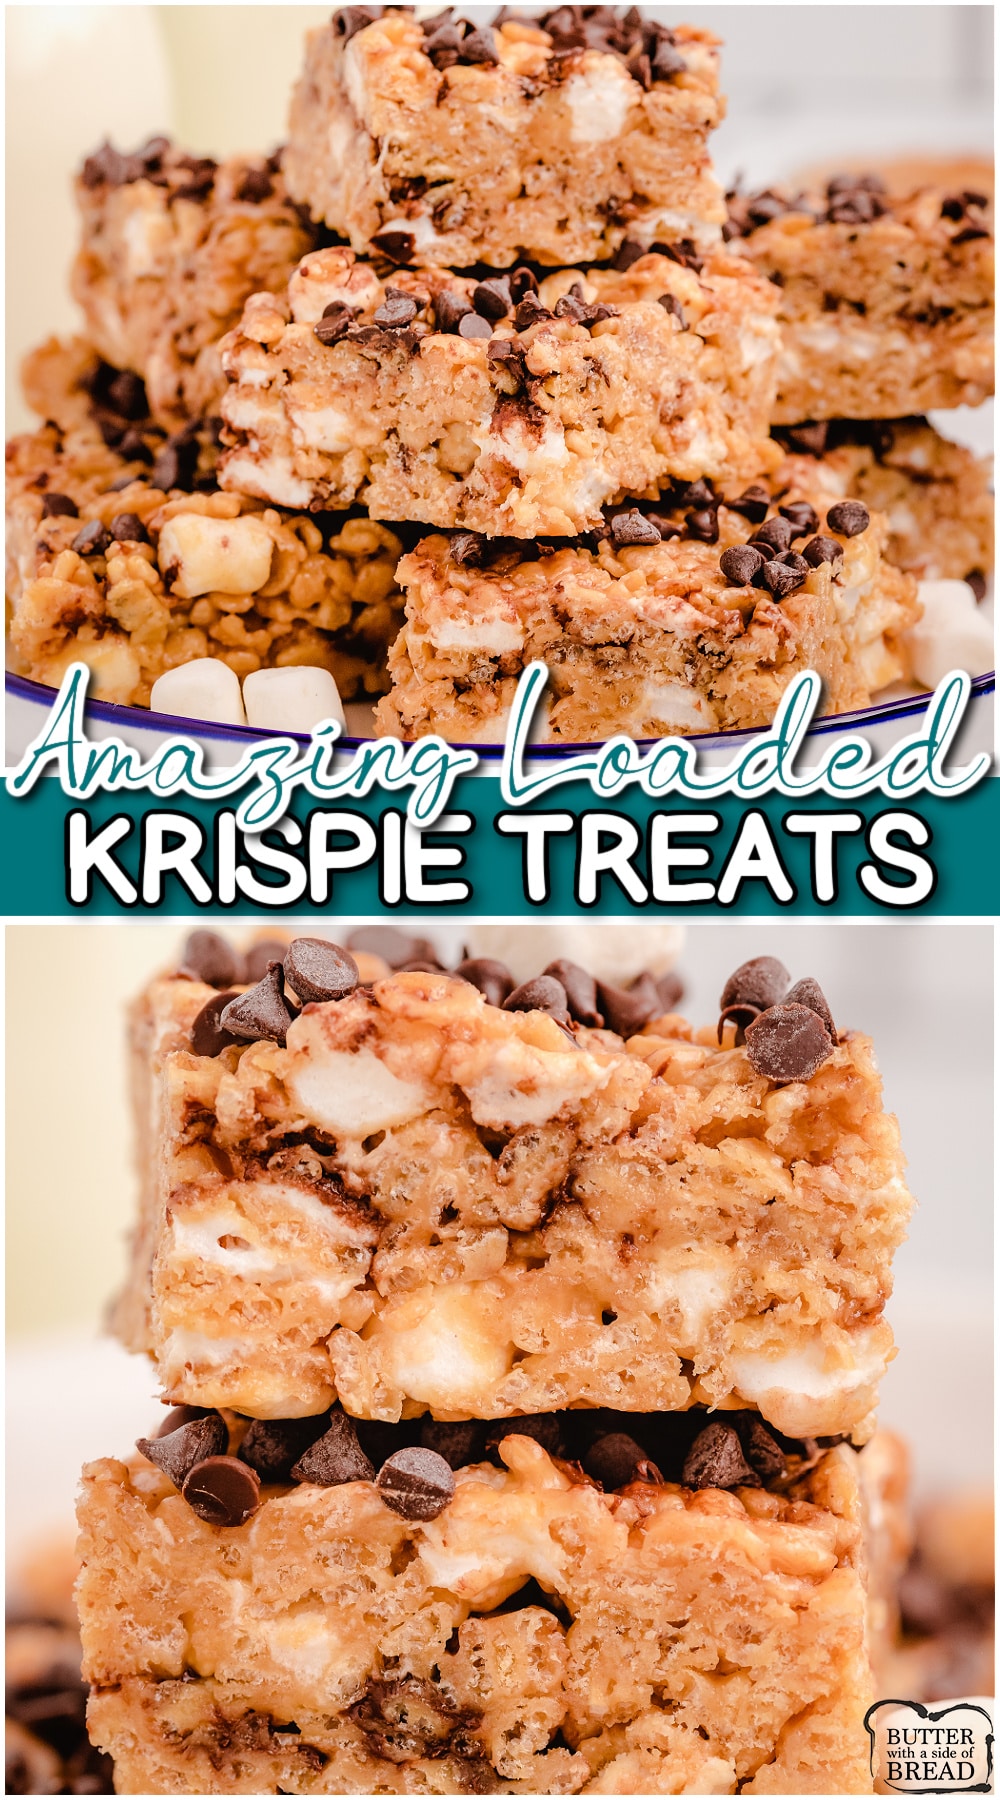 Loaded Krispie Treats are an incredibly delicious twist on a classic treat! These homemade rice krispie treats are made with peanut butter, marshmallows, Krispie cereal & chocolate chips!